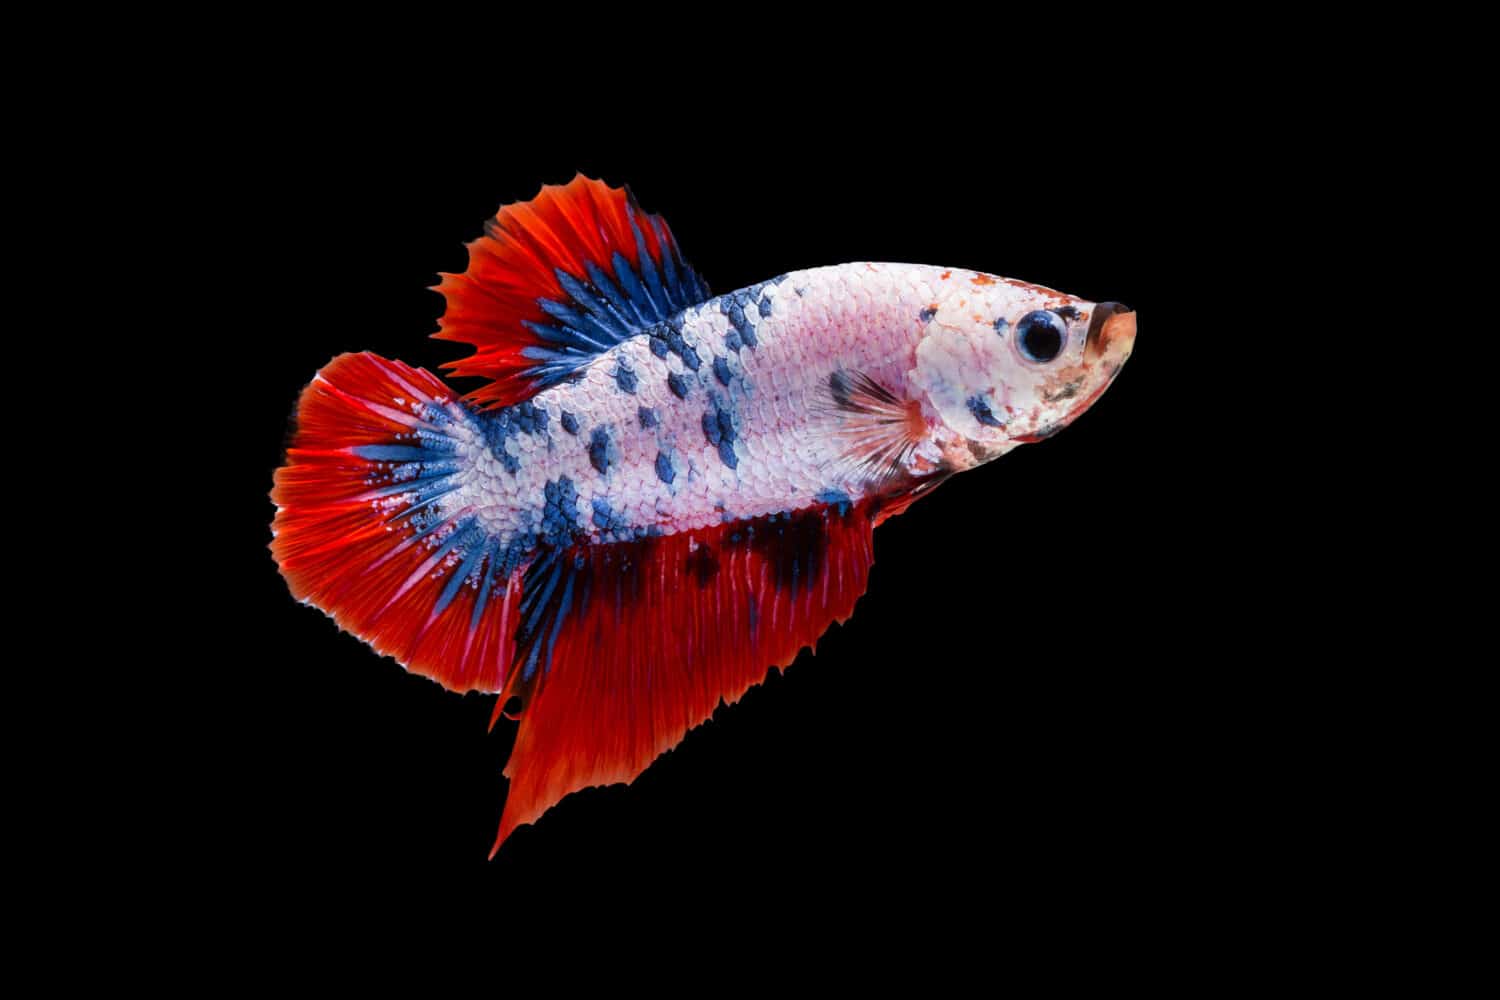 Moving moment of siamese fighting fish, Betta splendens (Plakat Thai) is a popular species of freshwater aquarium fish isolated on black background.